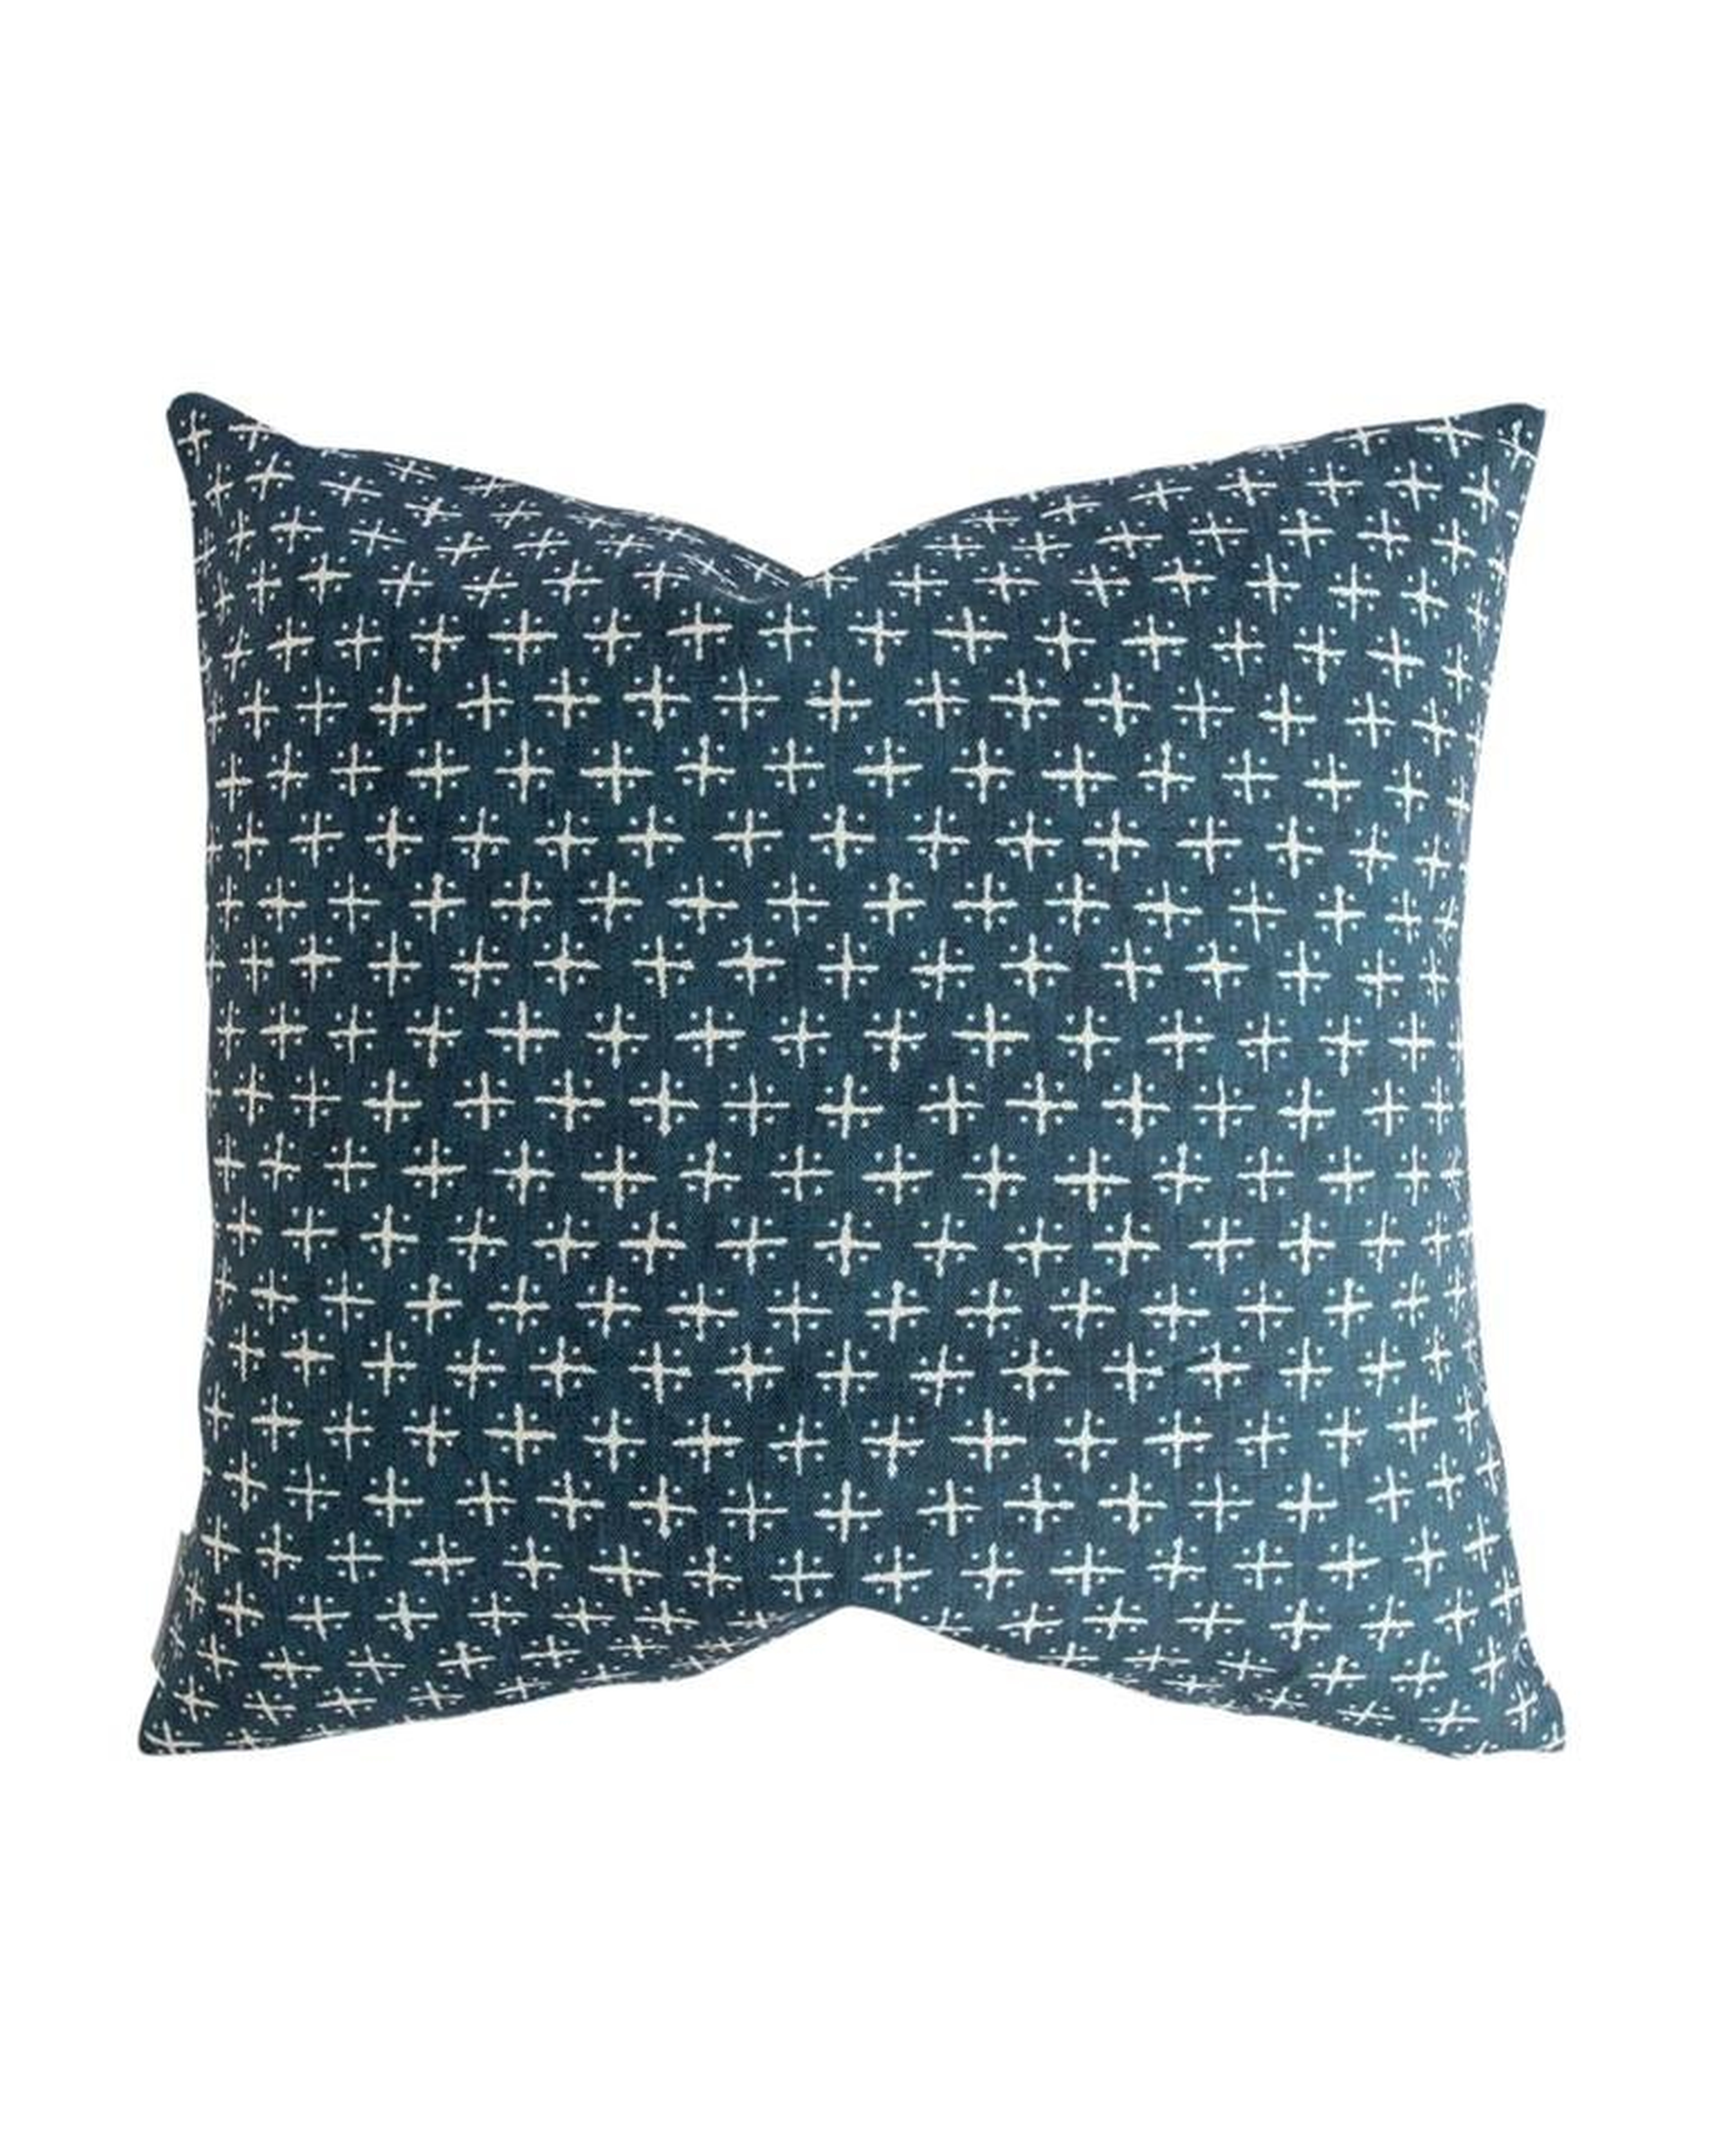 NEWPORT CROSS PILLOW WITHOUT INSERT, 22" x 22" - McGee & Co.